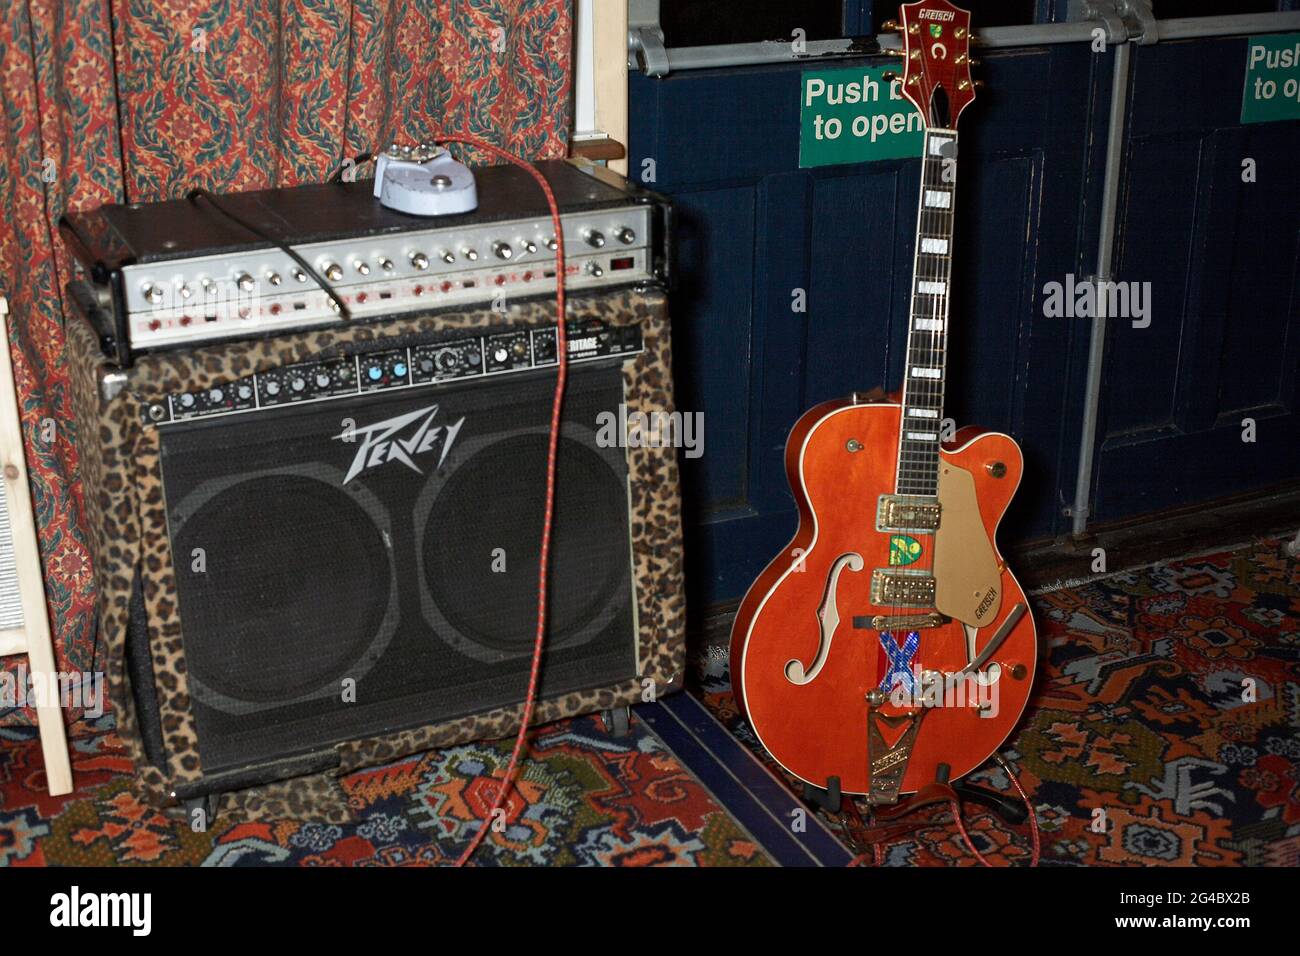 GREAT BRITAIN / England /Electric guitar and amplifier set up indoor for nighttime performance Stock Photo